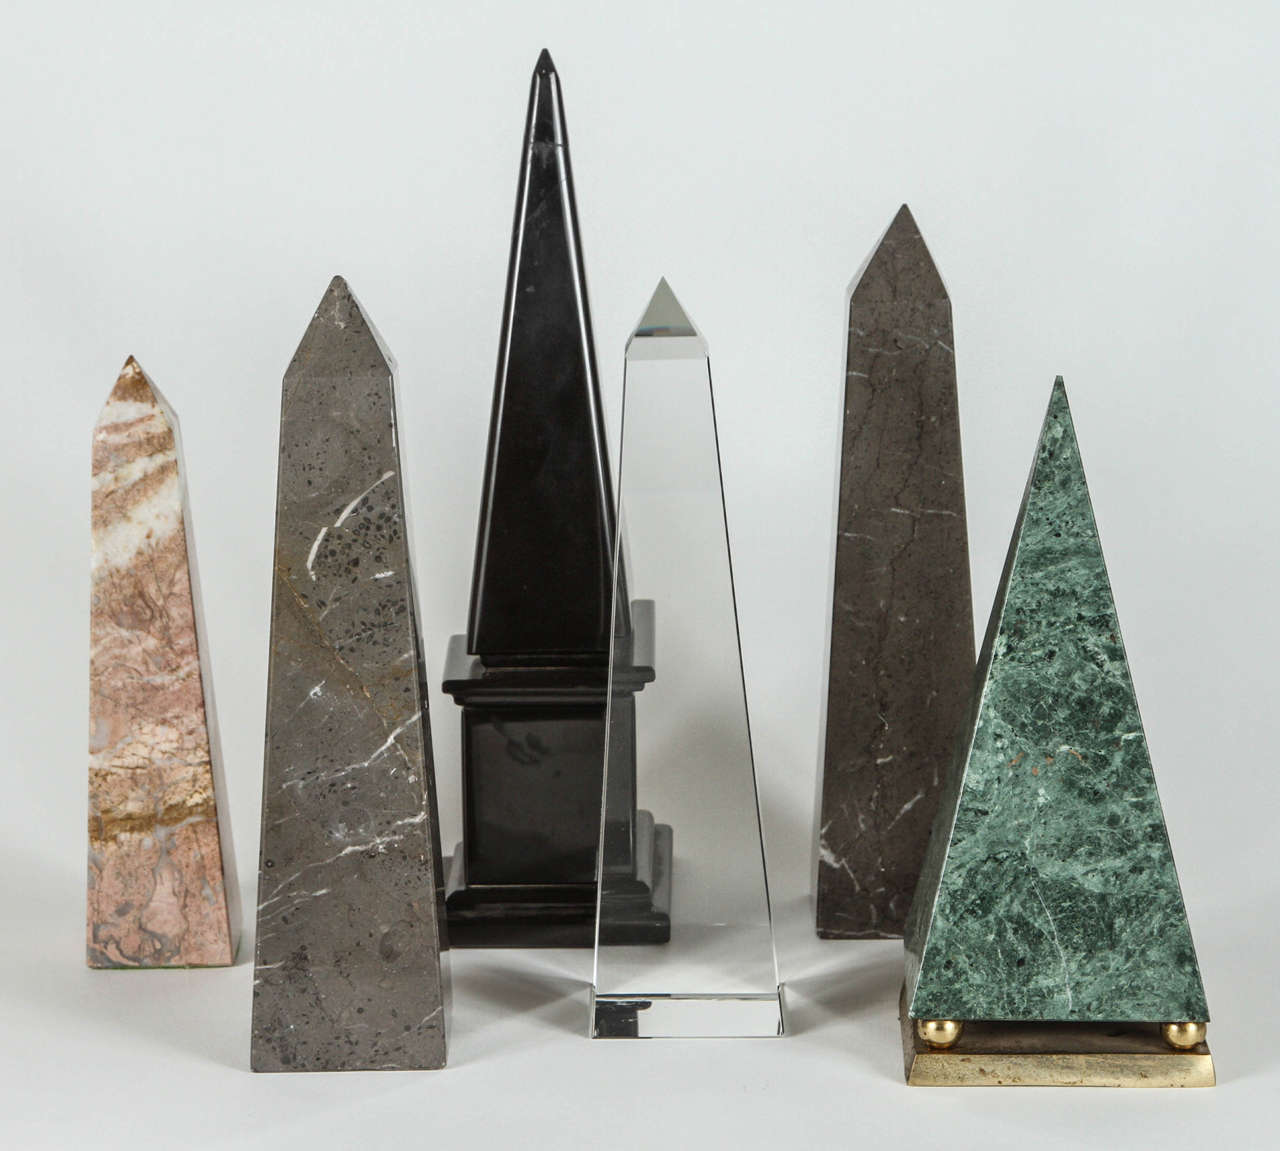 Collection of six obelisks.
Black stone dimensions - 15 x 3.37 x 3.75